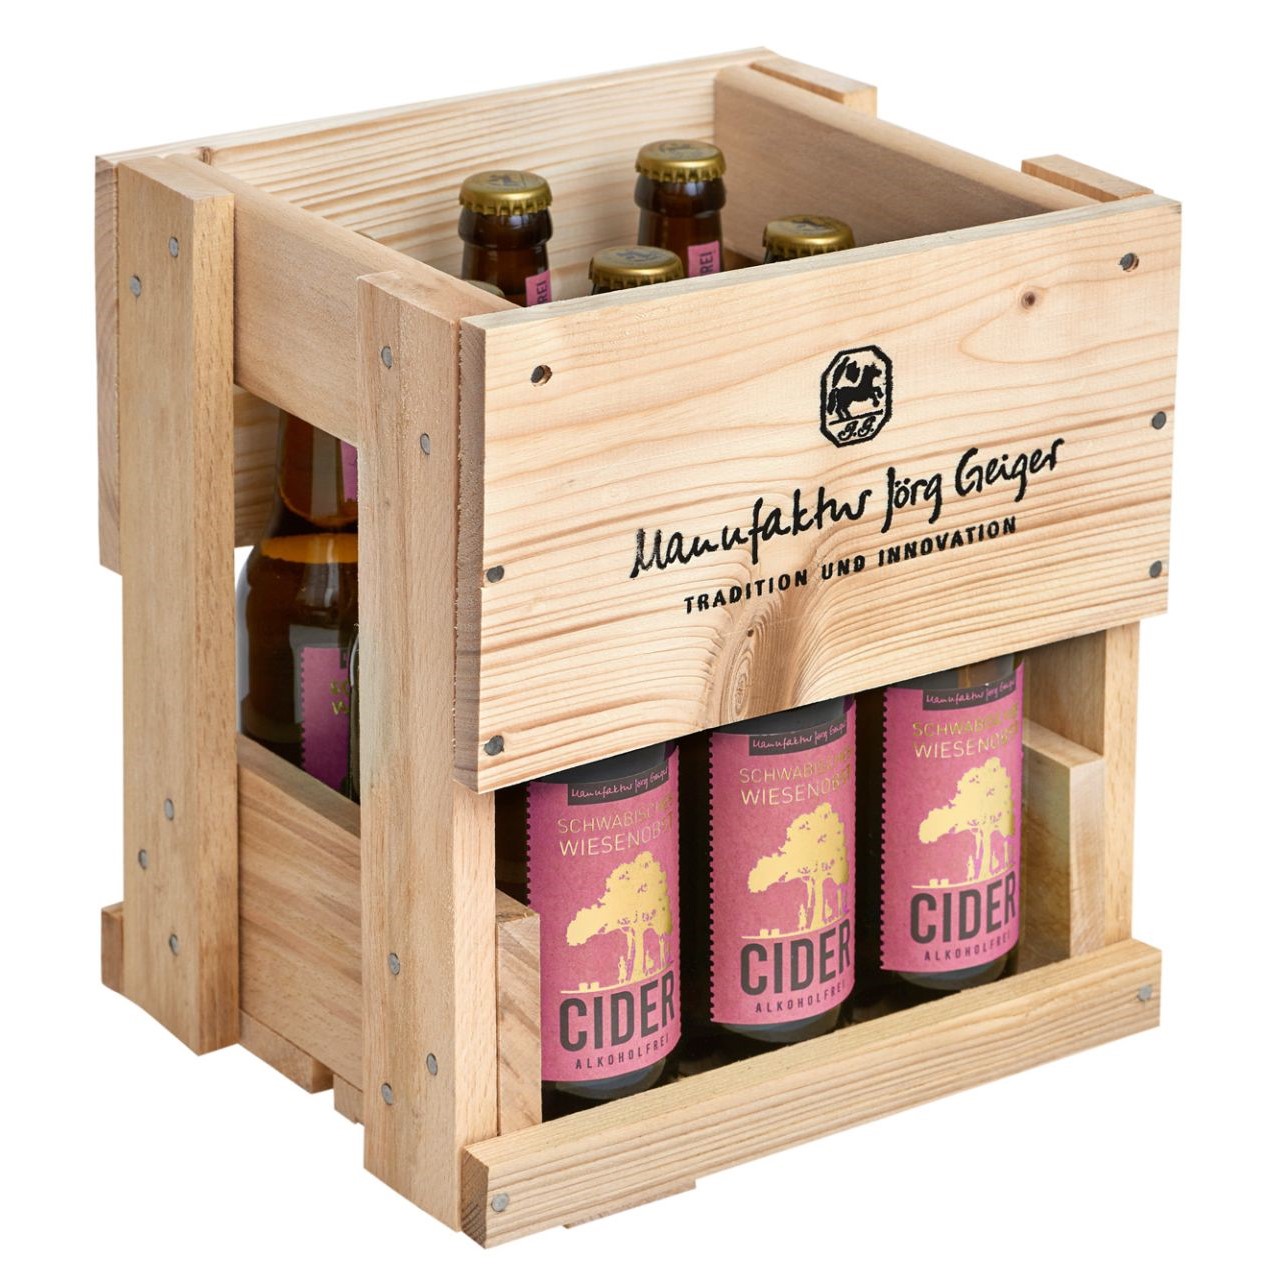 Swabian MeadowFruit Cider rosé - alcohol free dry in 9-pack wooden box